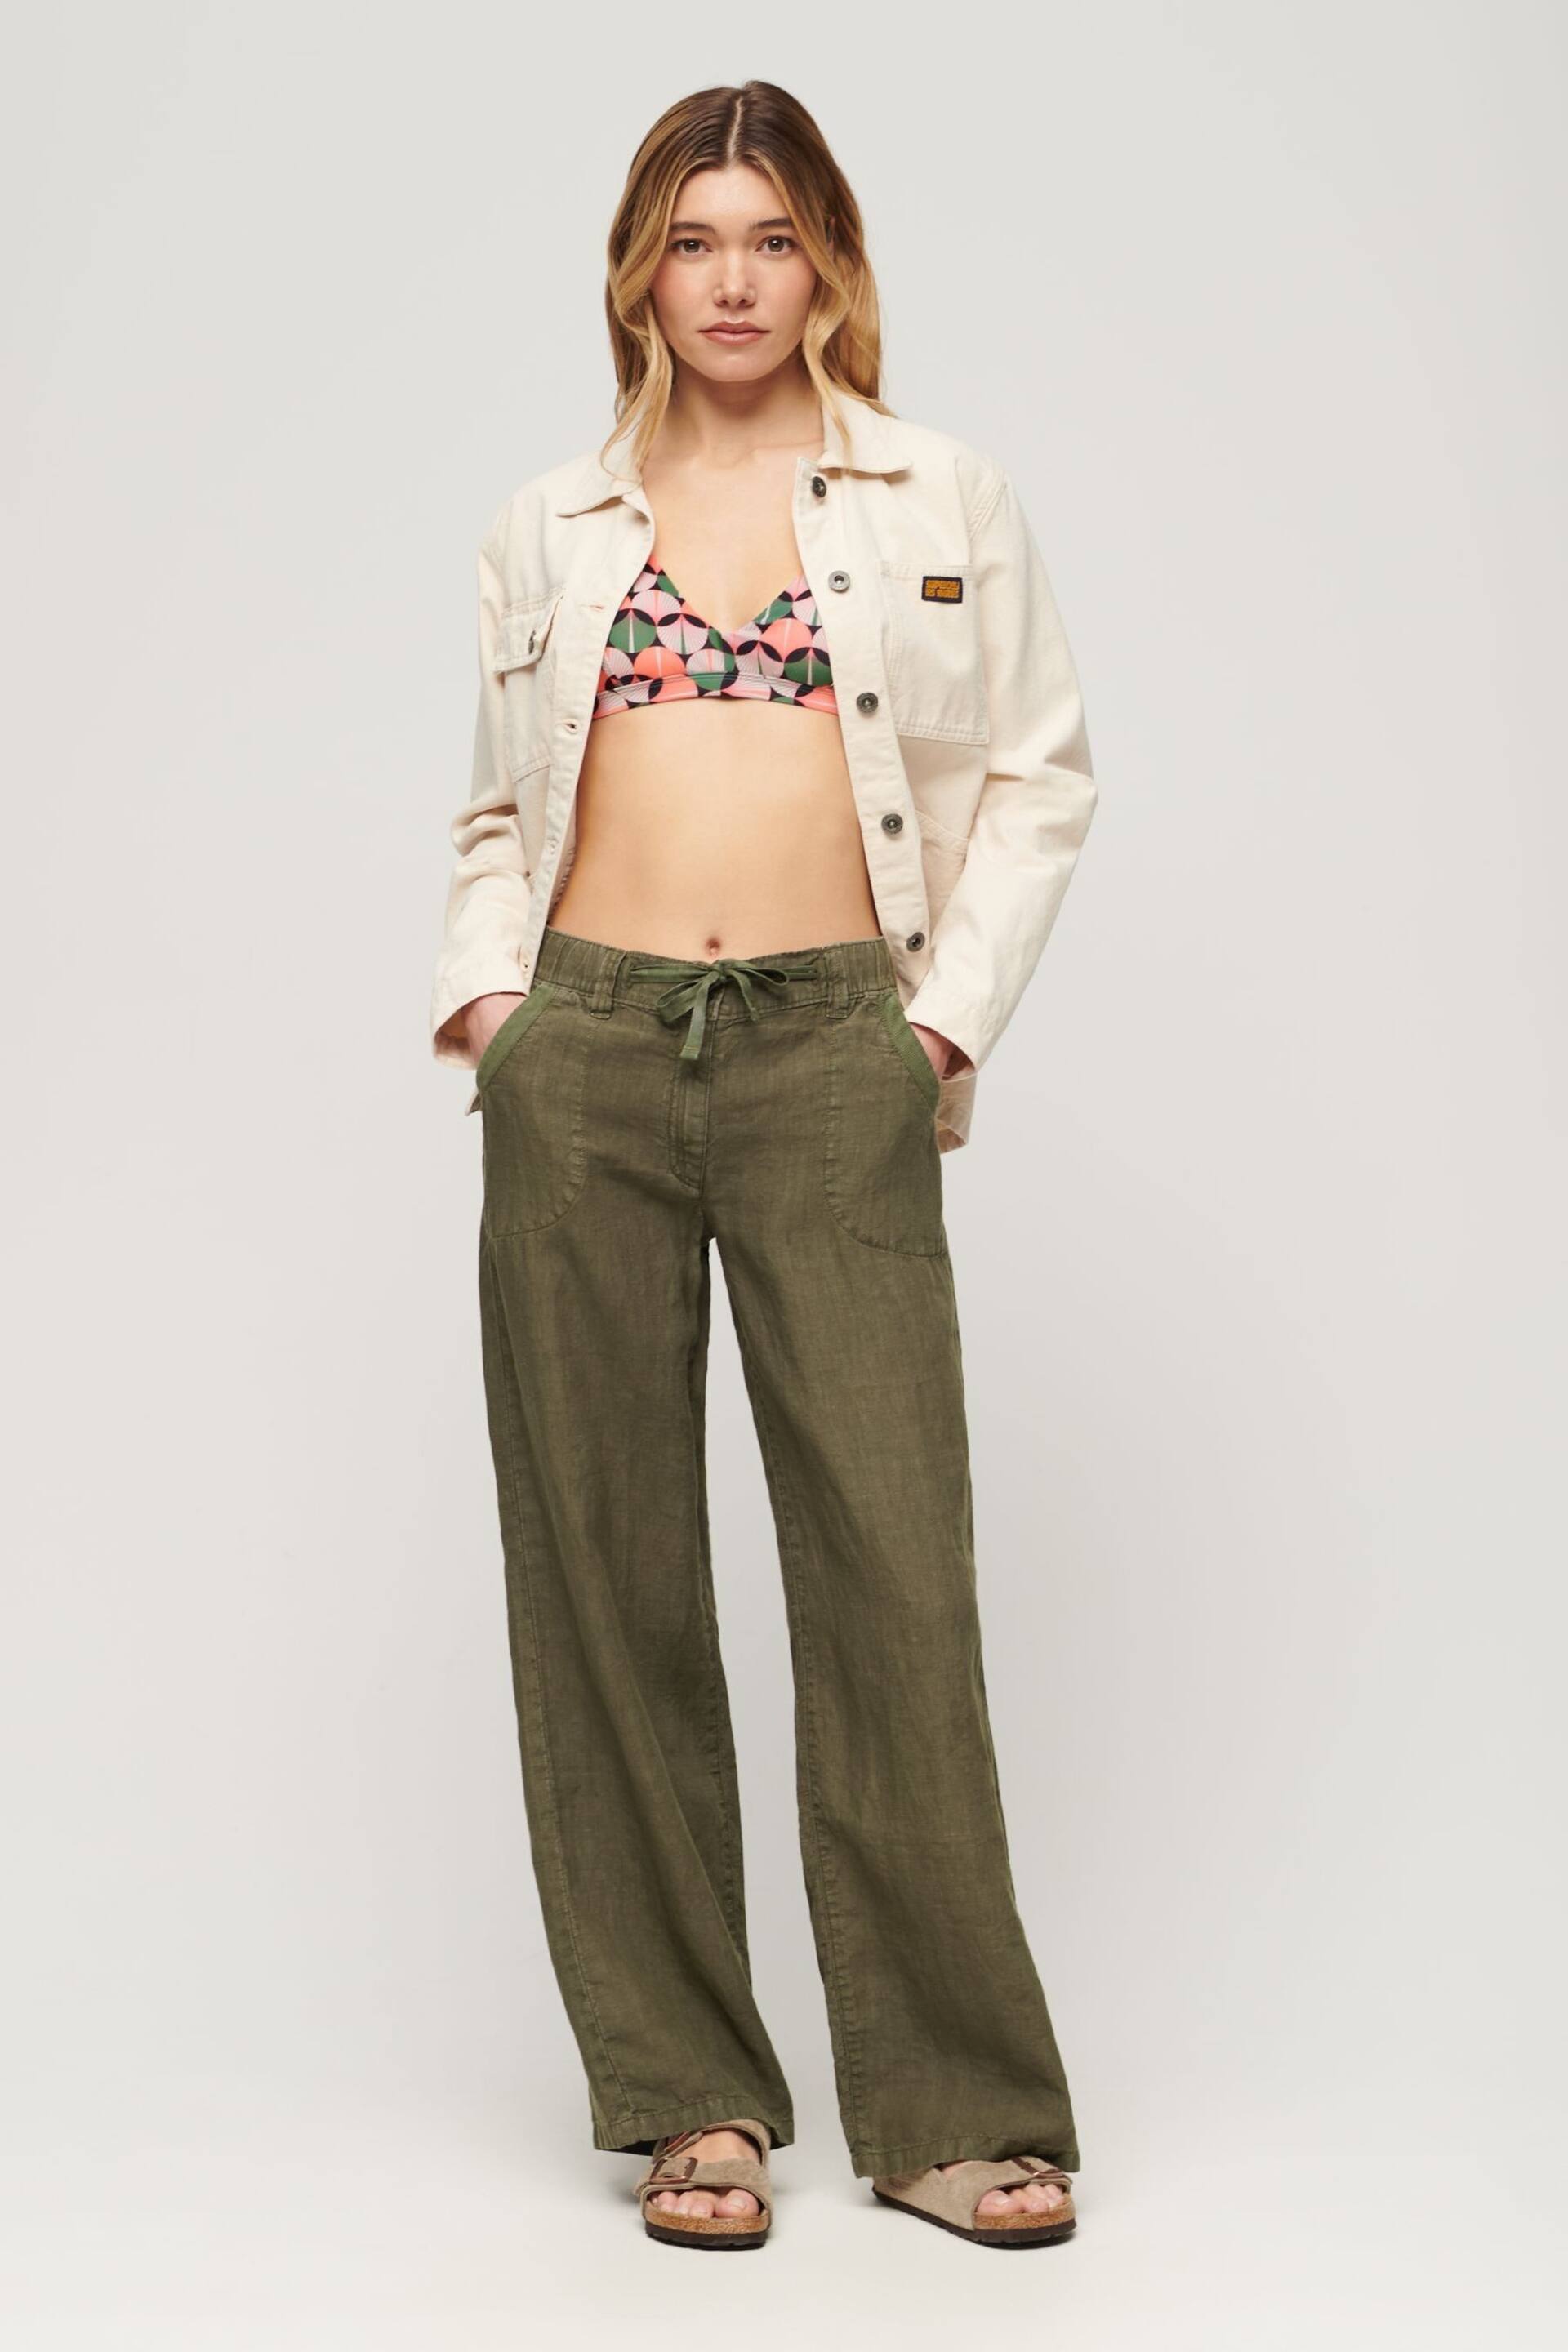 Superdry Green Linen Low Rise Trousers - Image 3 of 6